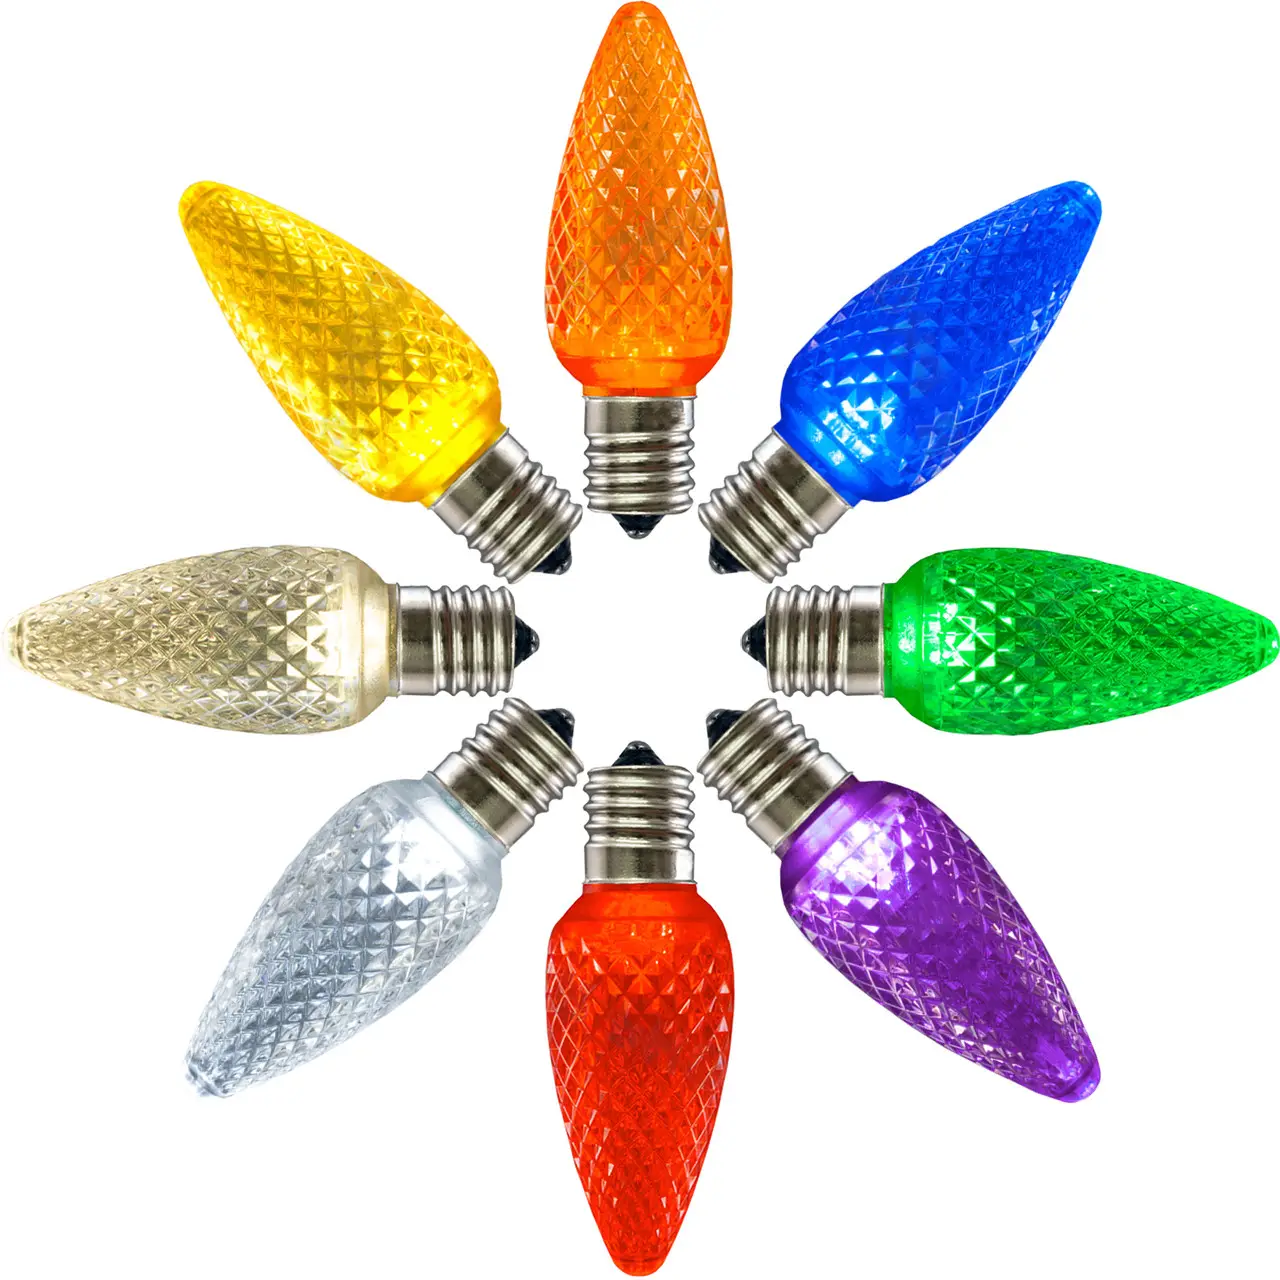 110v 0.8w Colorful C9 E17 Base Christmas Light Replacement Led Faceted Bulbs